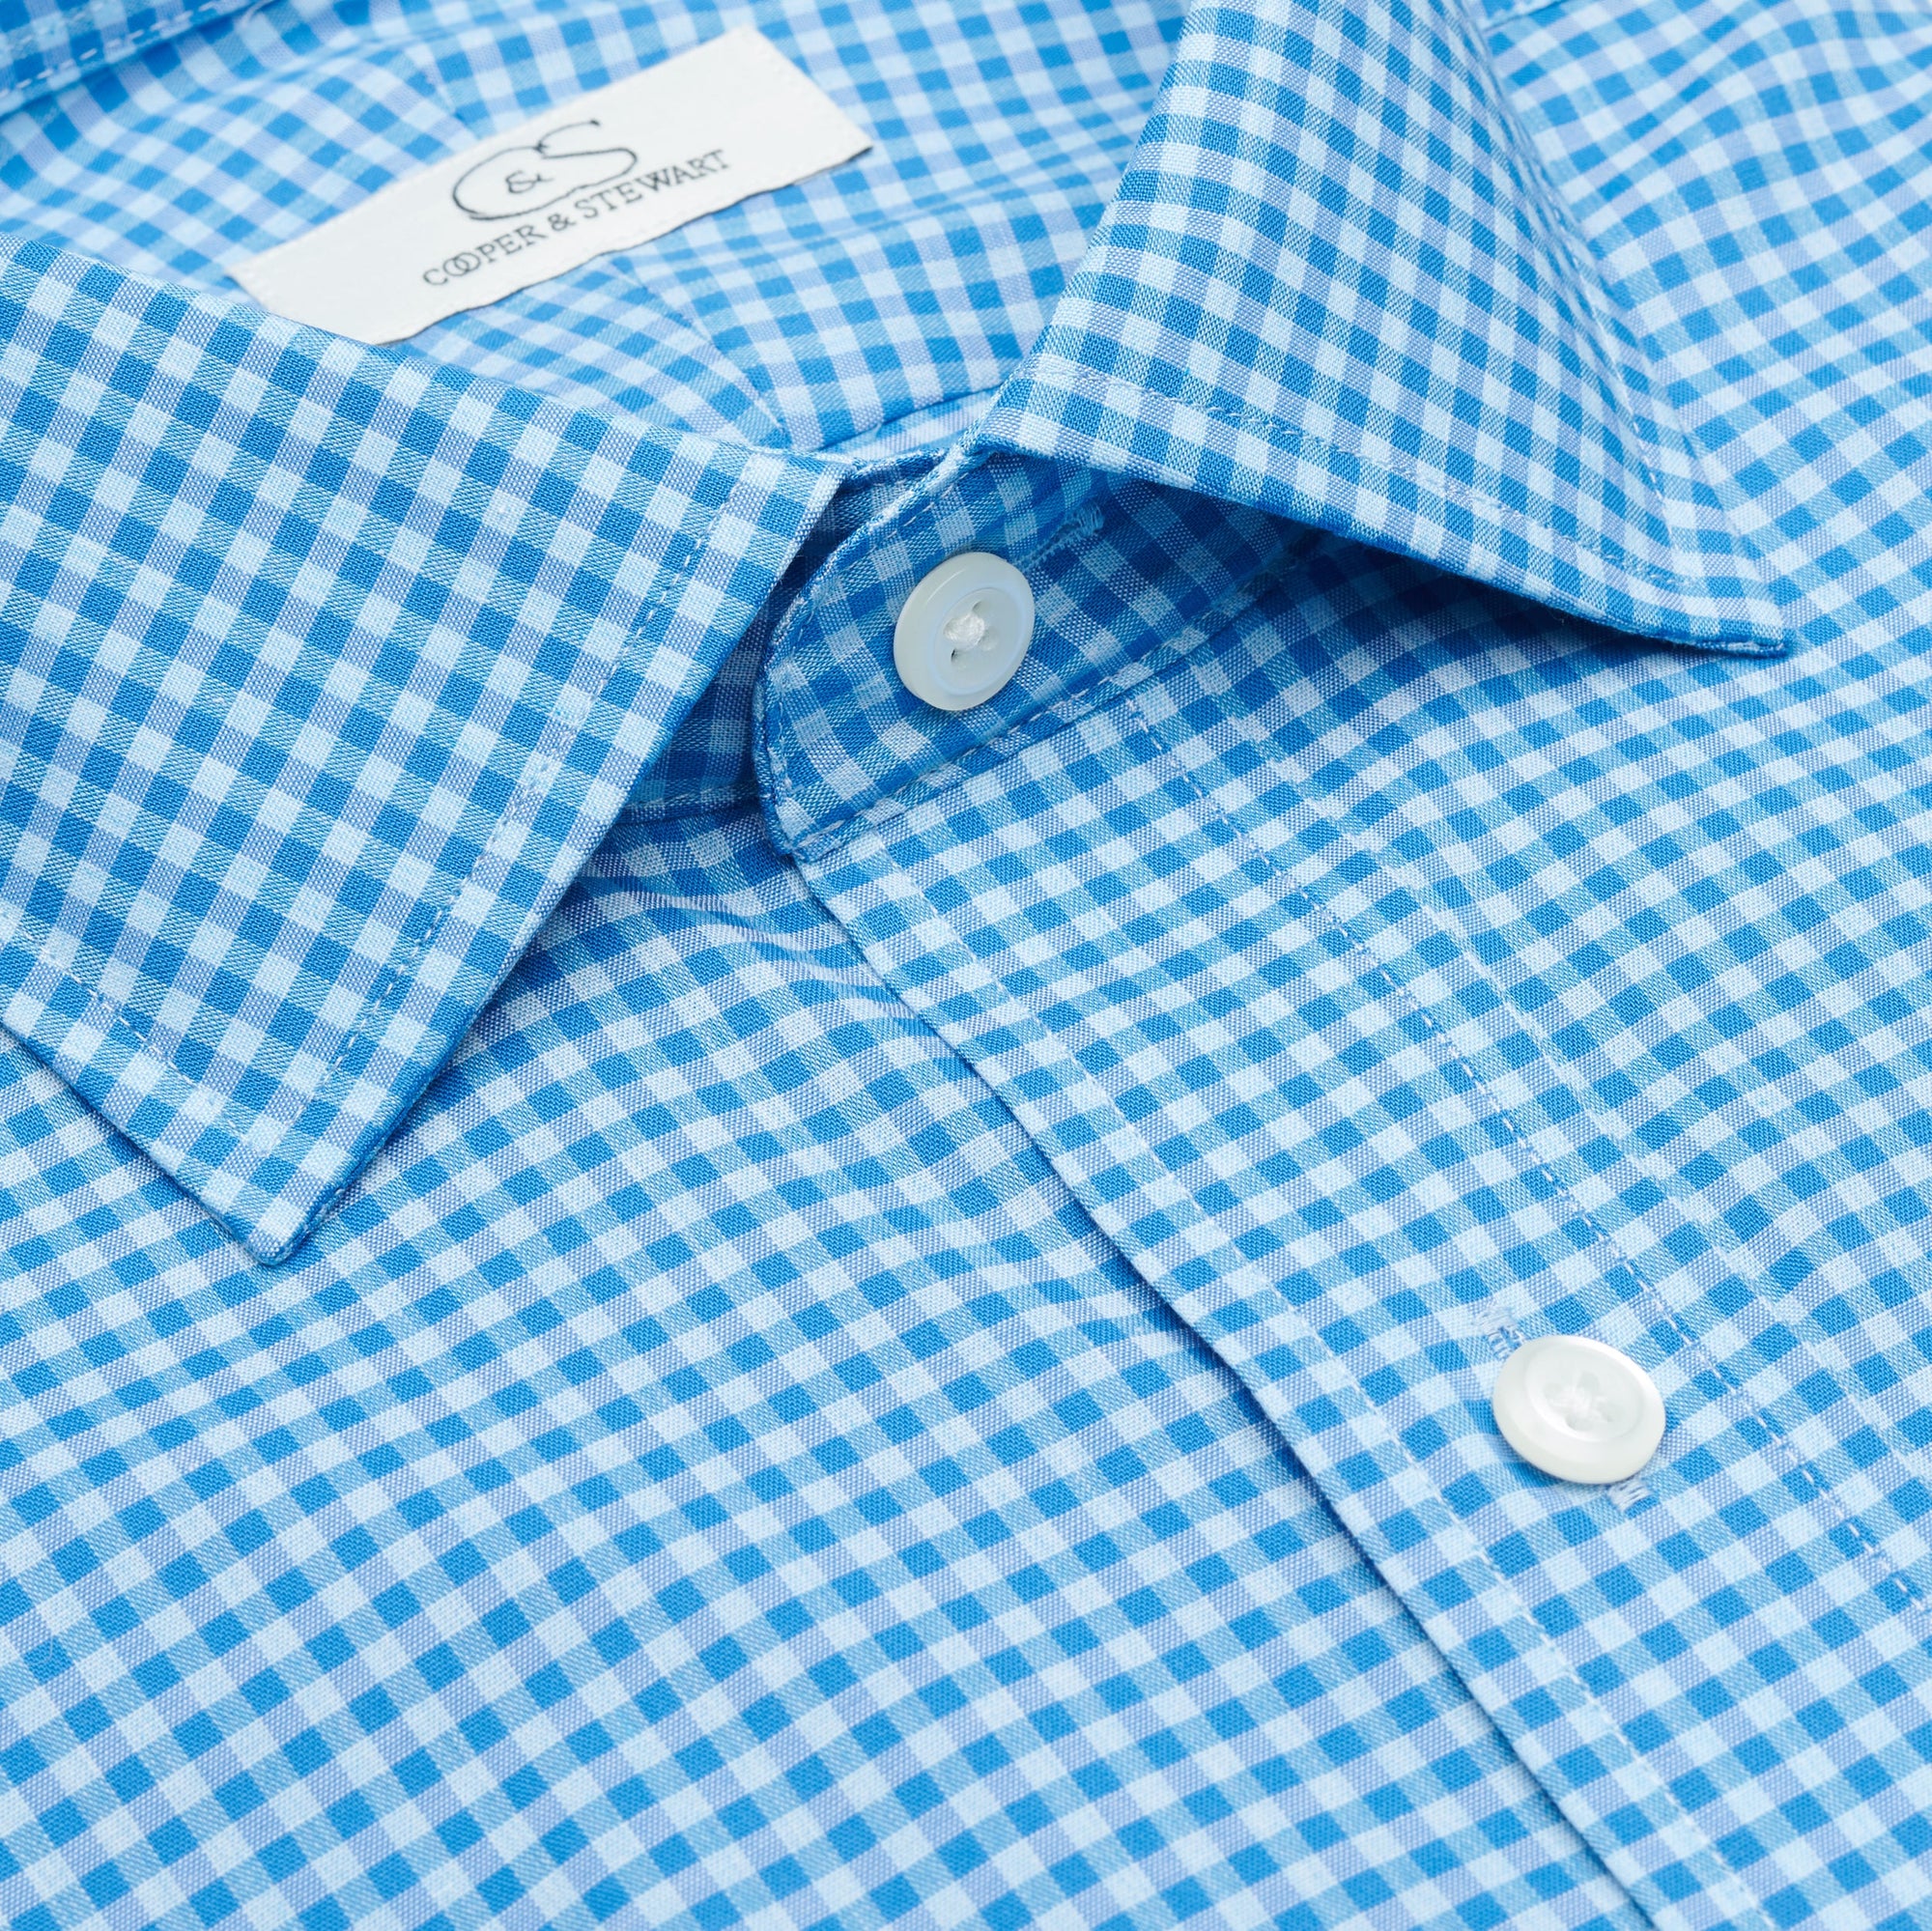 Turquoise Filled Gingham Check Wrinkle-Free Cotton Dress Shirt with Spread Collar by Cooper & Stewart